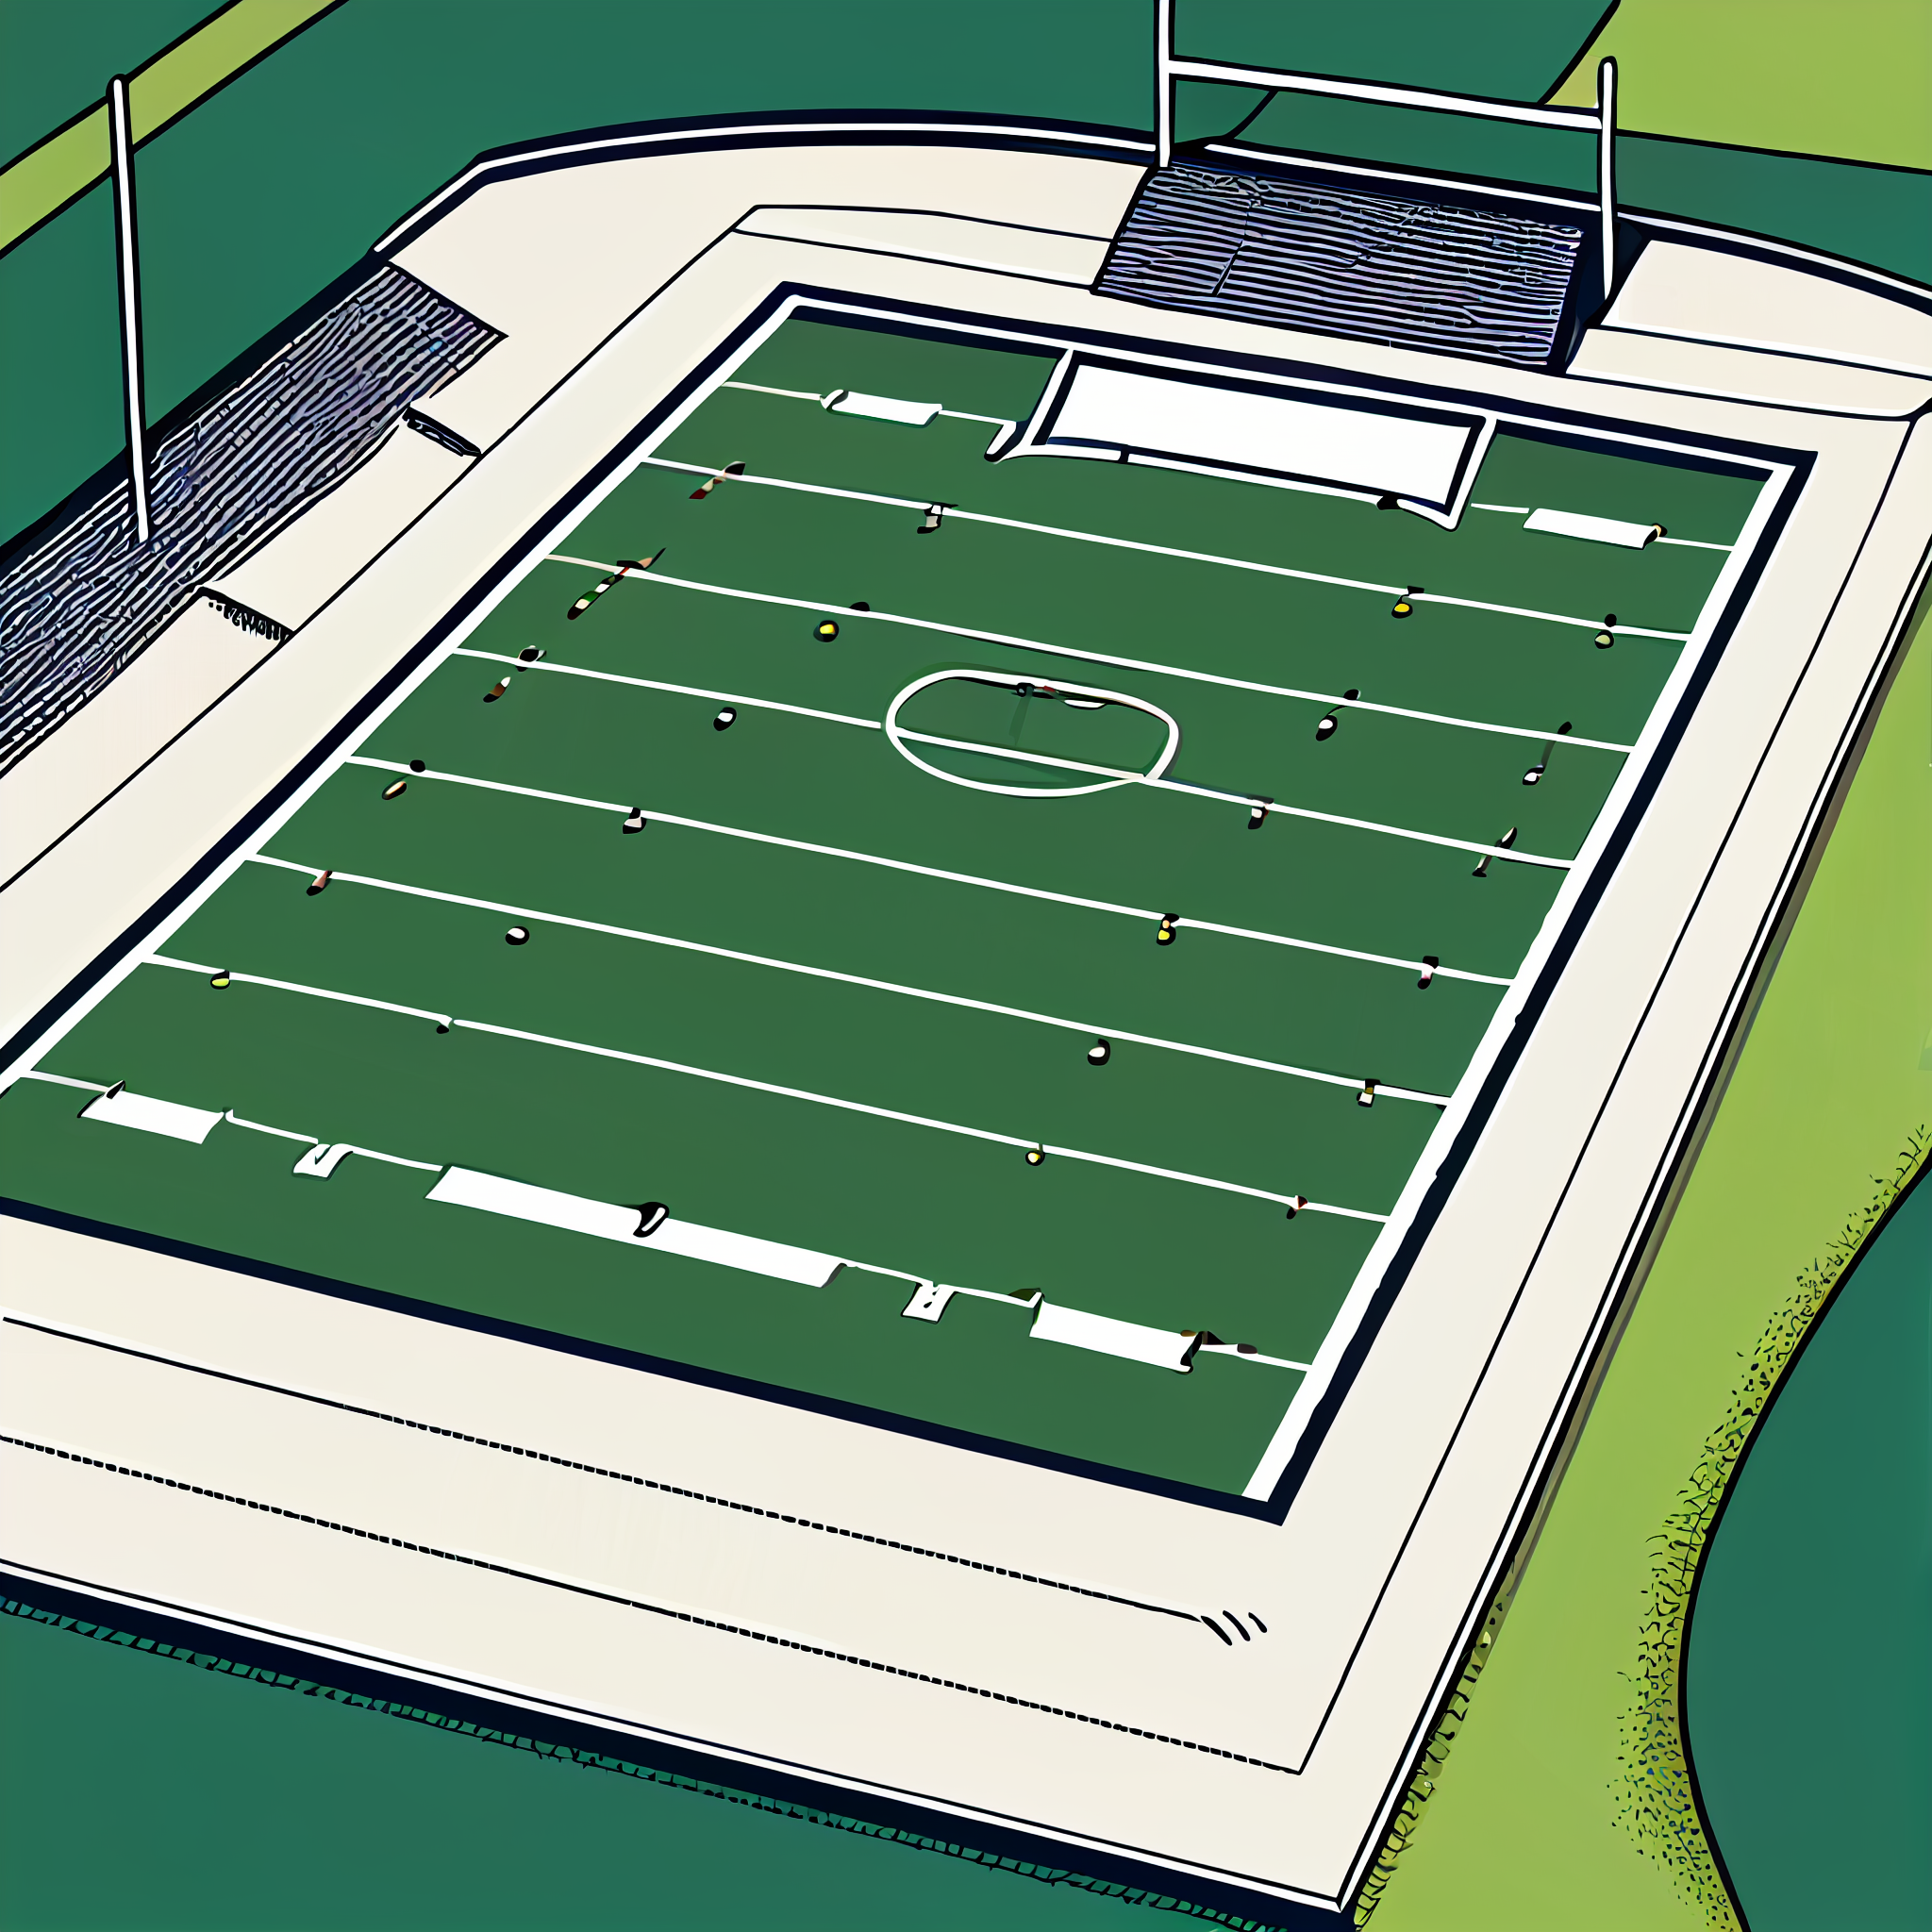 Football Pitch - American Football Background - CleanPNG / KissPNG